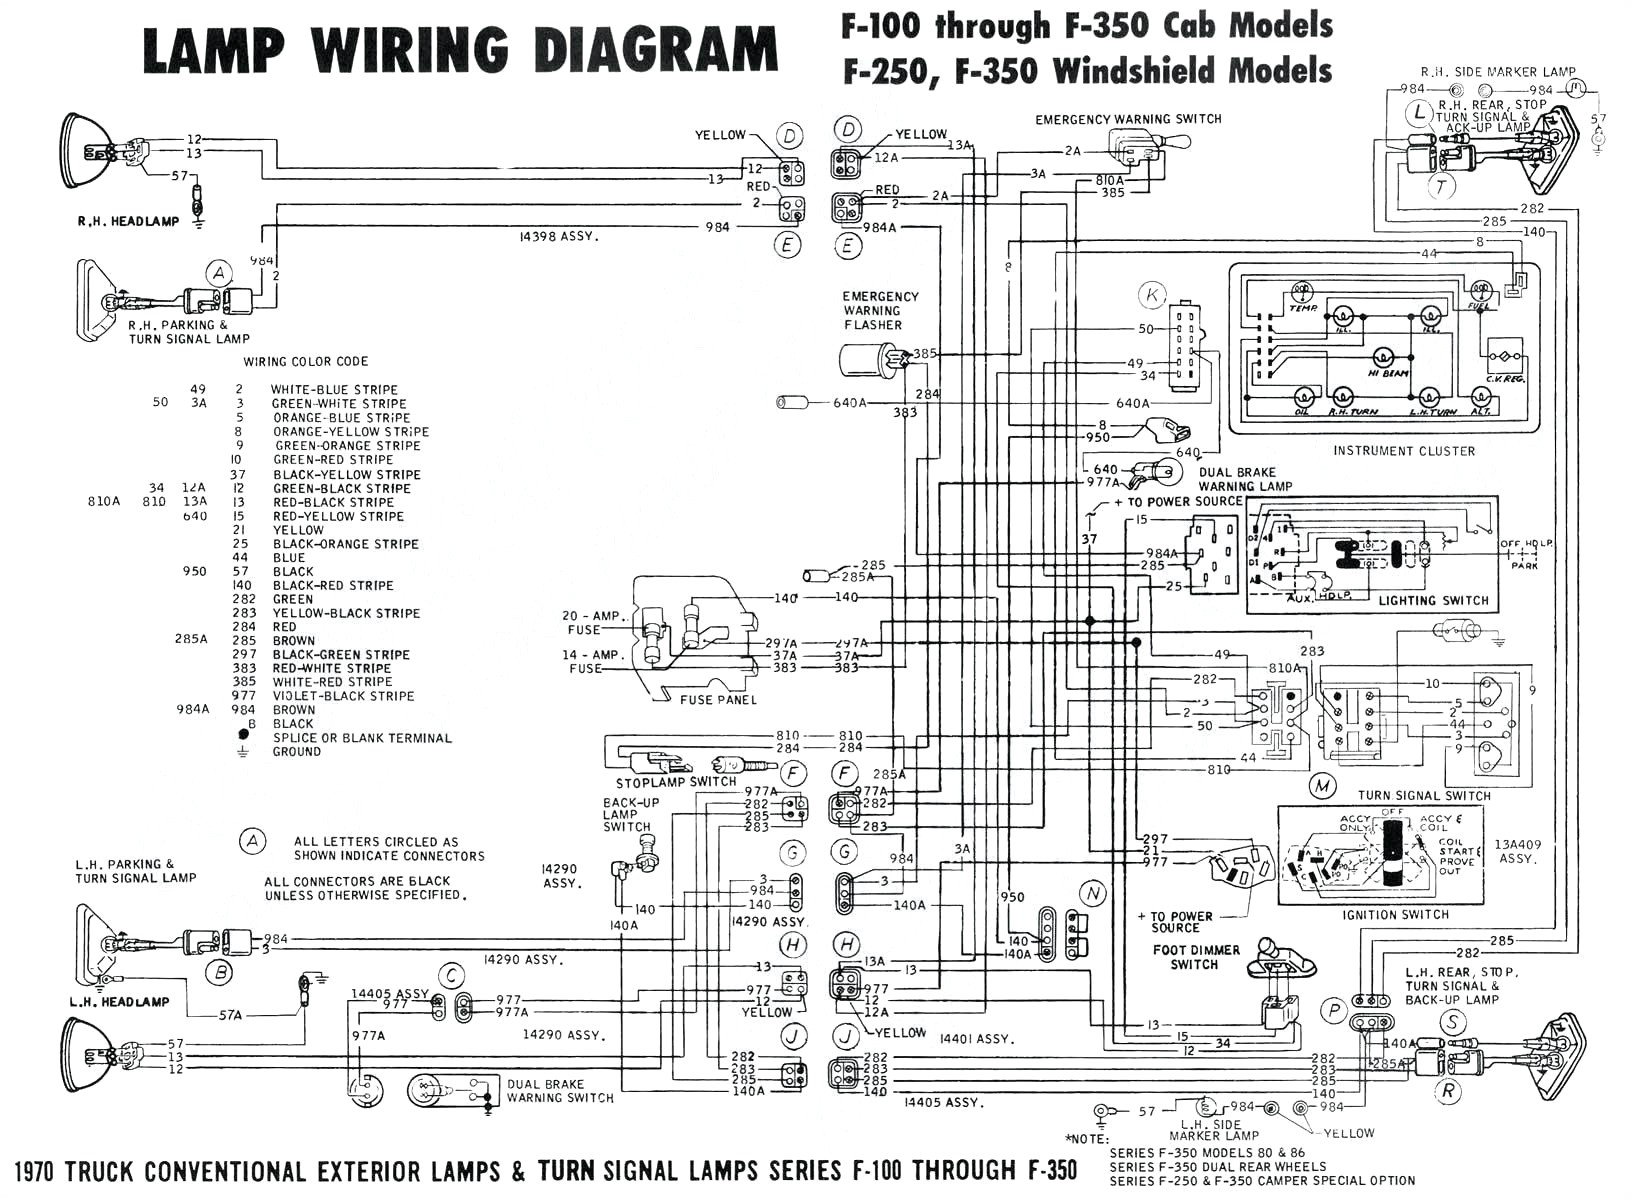 1935 ford headlight switch wiring wiring diagram datasource1935 ford headlight wiring wiring diagram yer 1935 ford